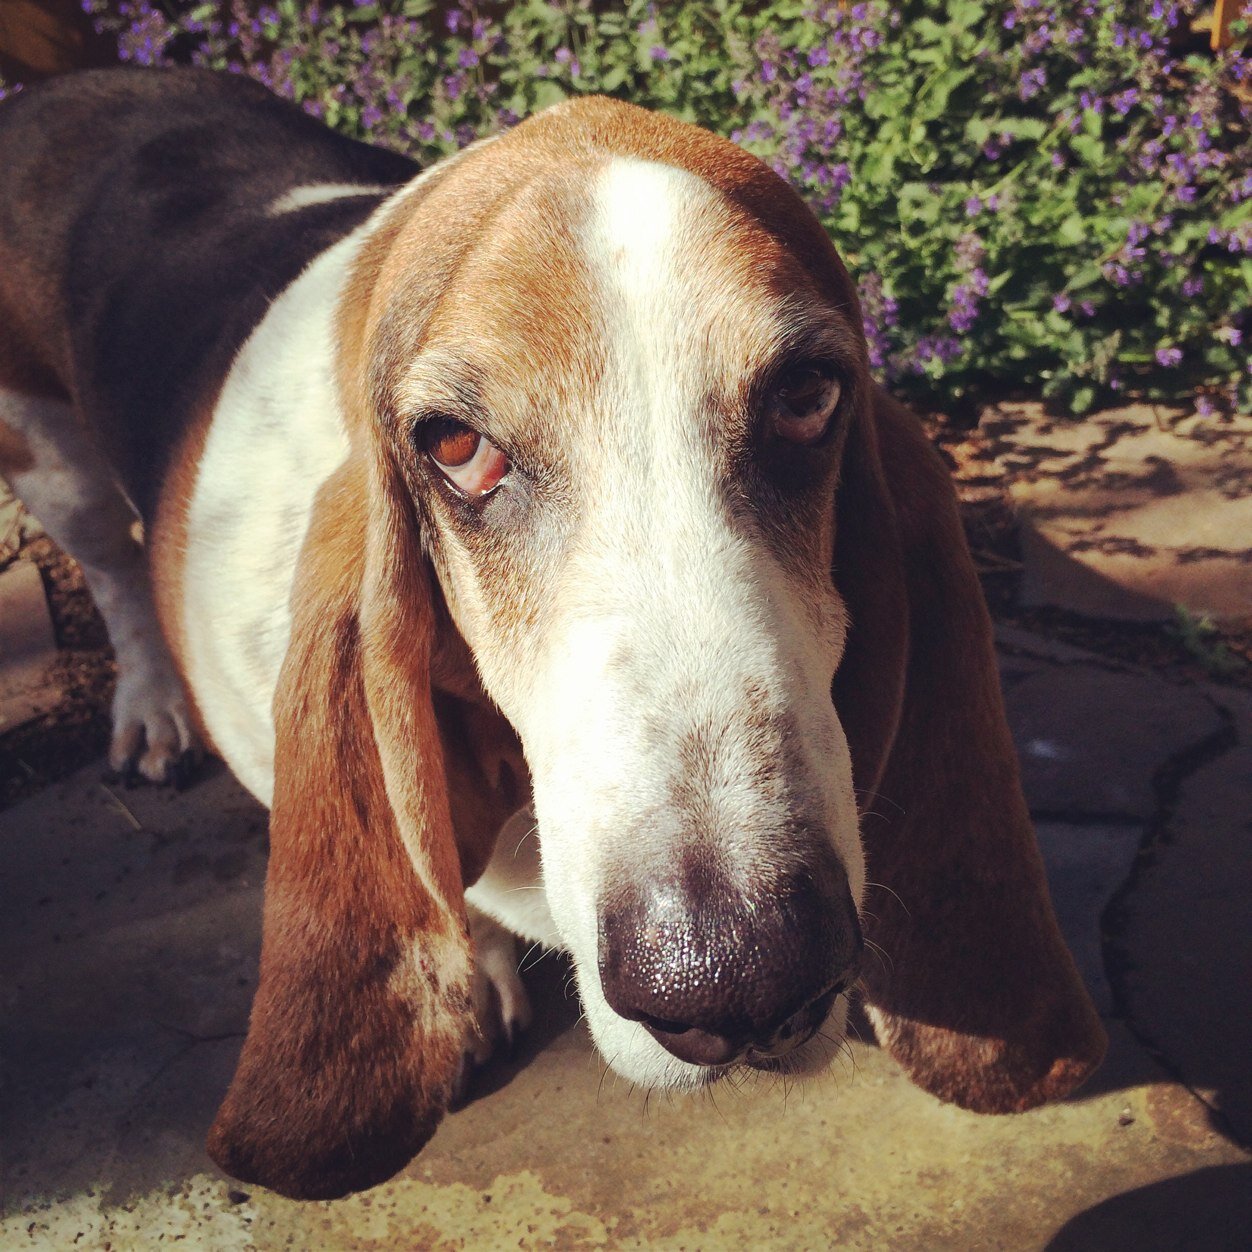 Almost daily Bassets Hound lols and pictures stuffs.
Follows us:
http://t.co/uK3bqDV6TC
Gets us:
http://t.co/hkIlHtbkGk
{}^ ^{}